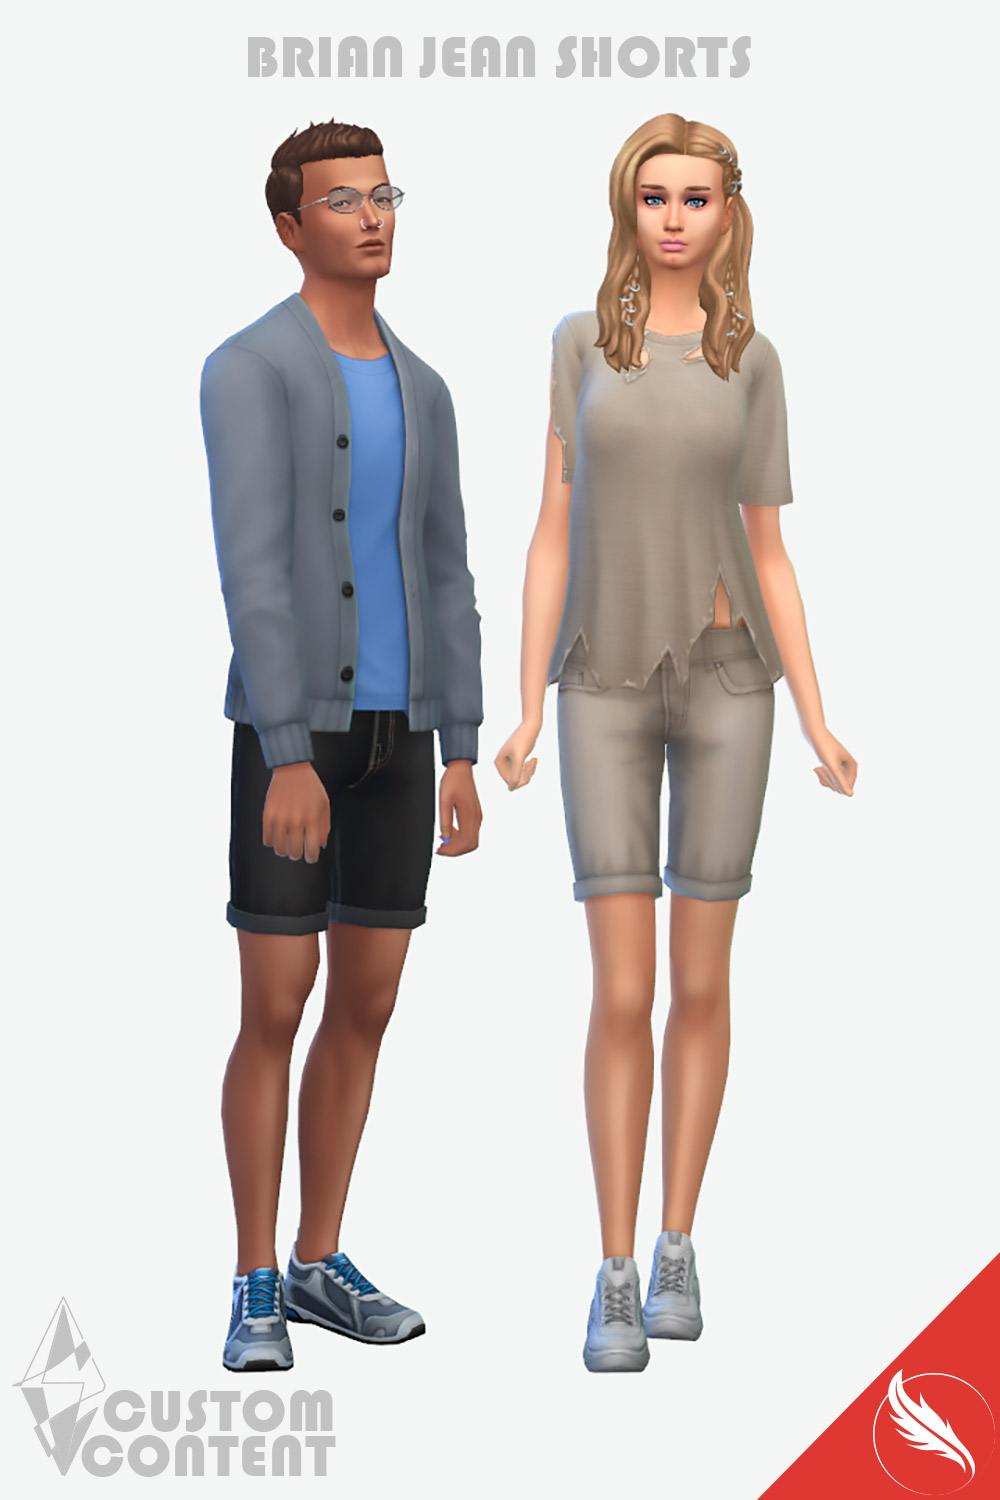 The Sims 4 Male Shorts CC